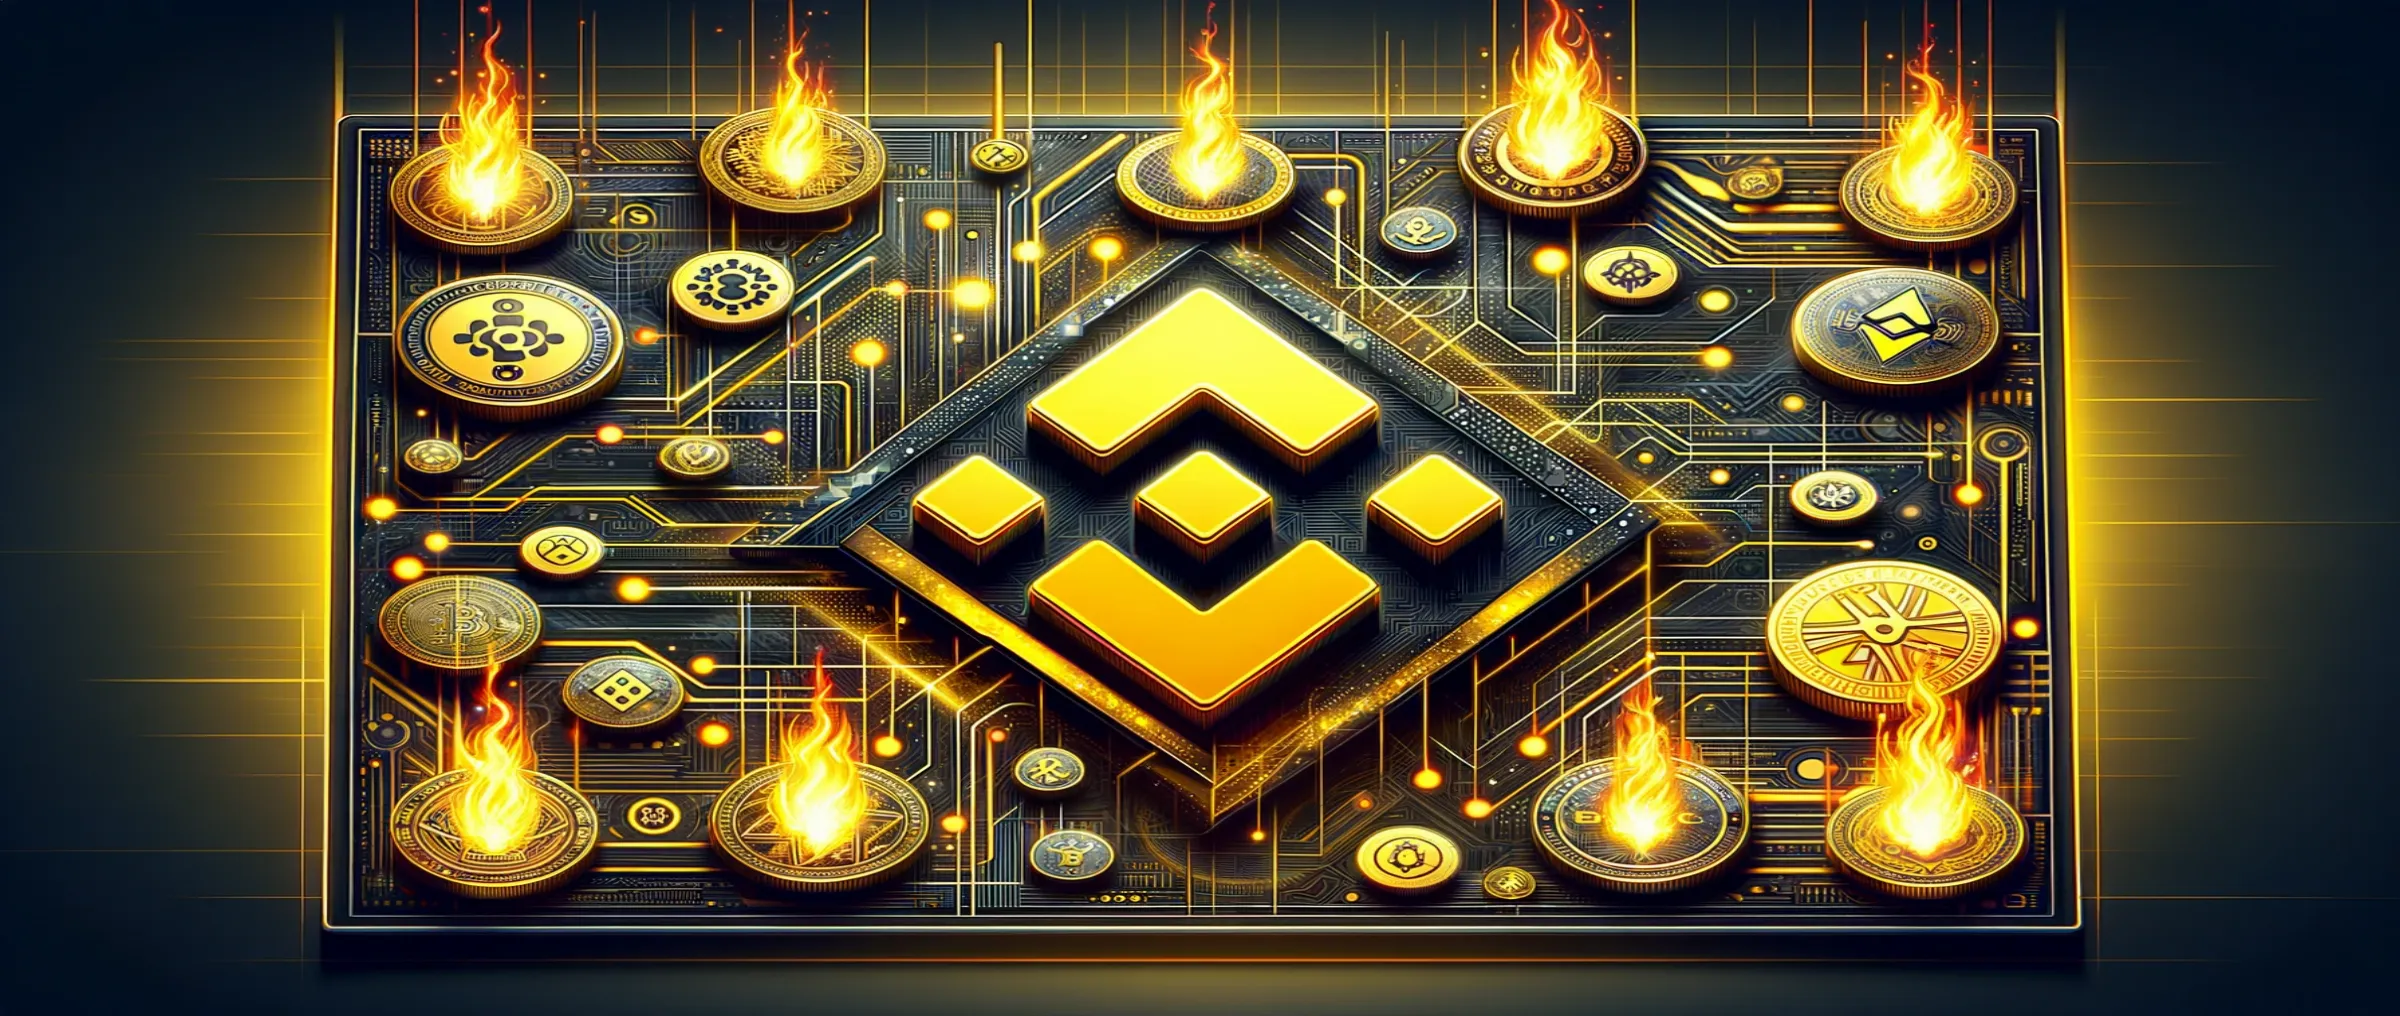 Binance has announced a "significant" burning of several tokens